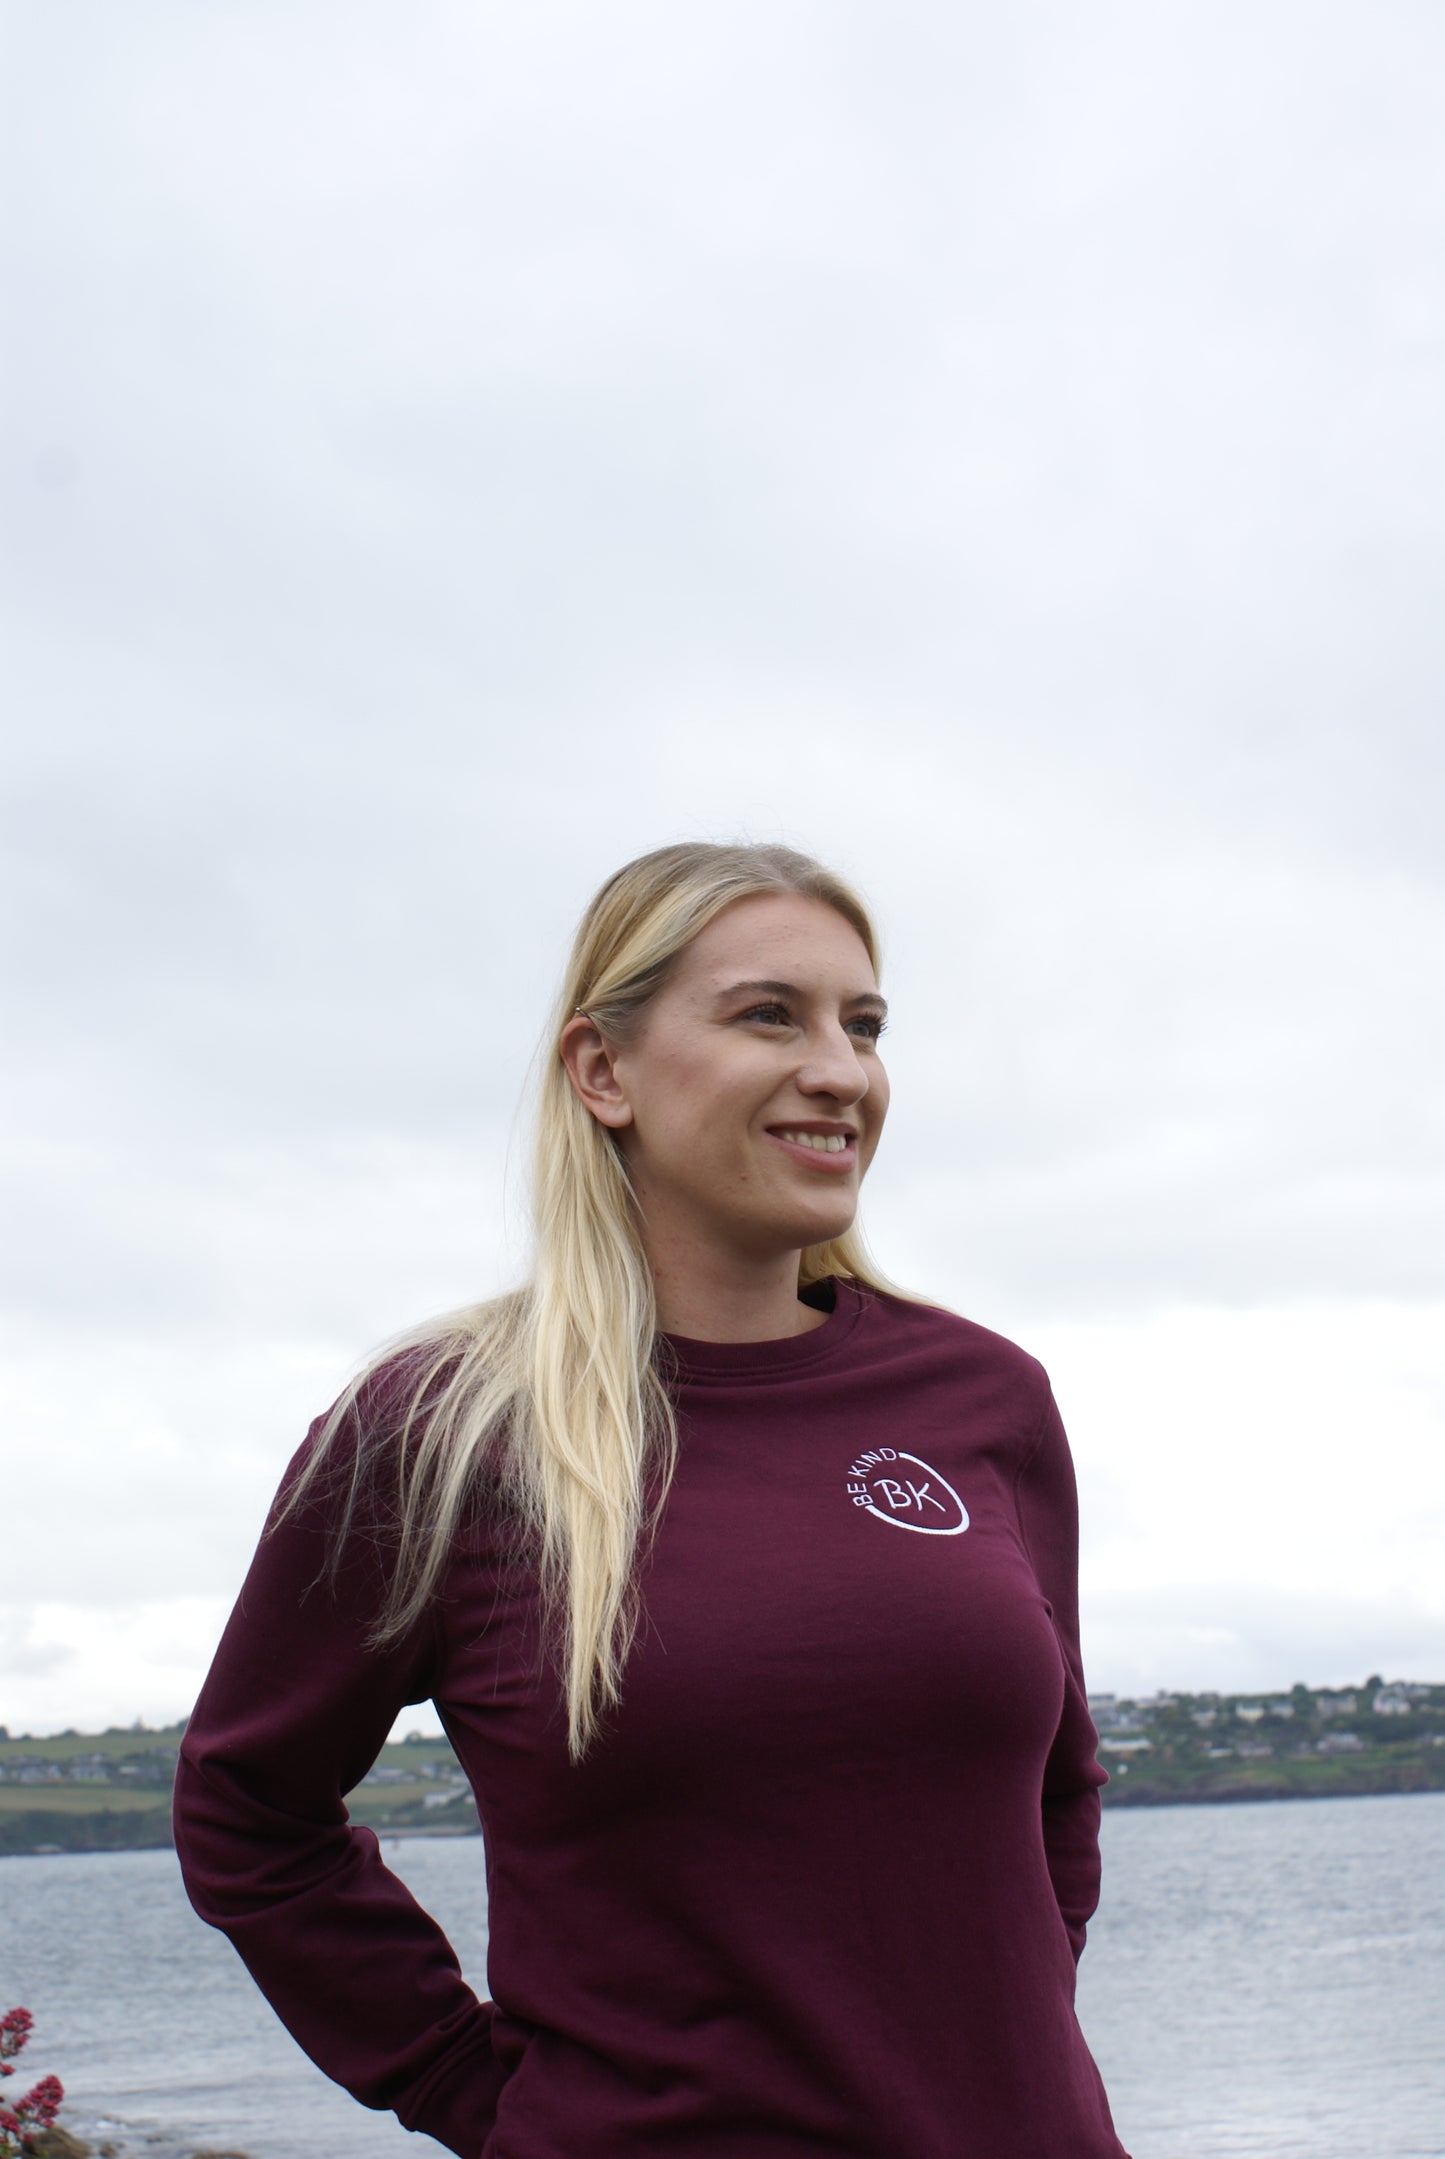 A woman stands by the water, she's wearing an Organic Cotton Burgundy sweatshirt from Be Kind Apparel's Freestyle Range